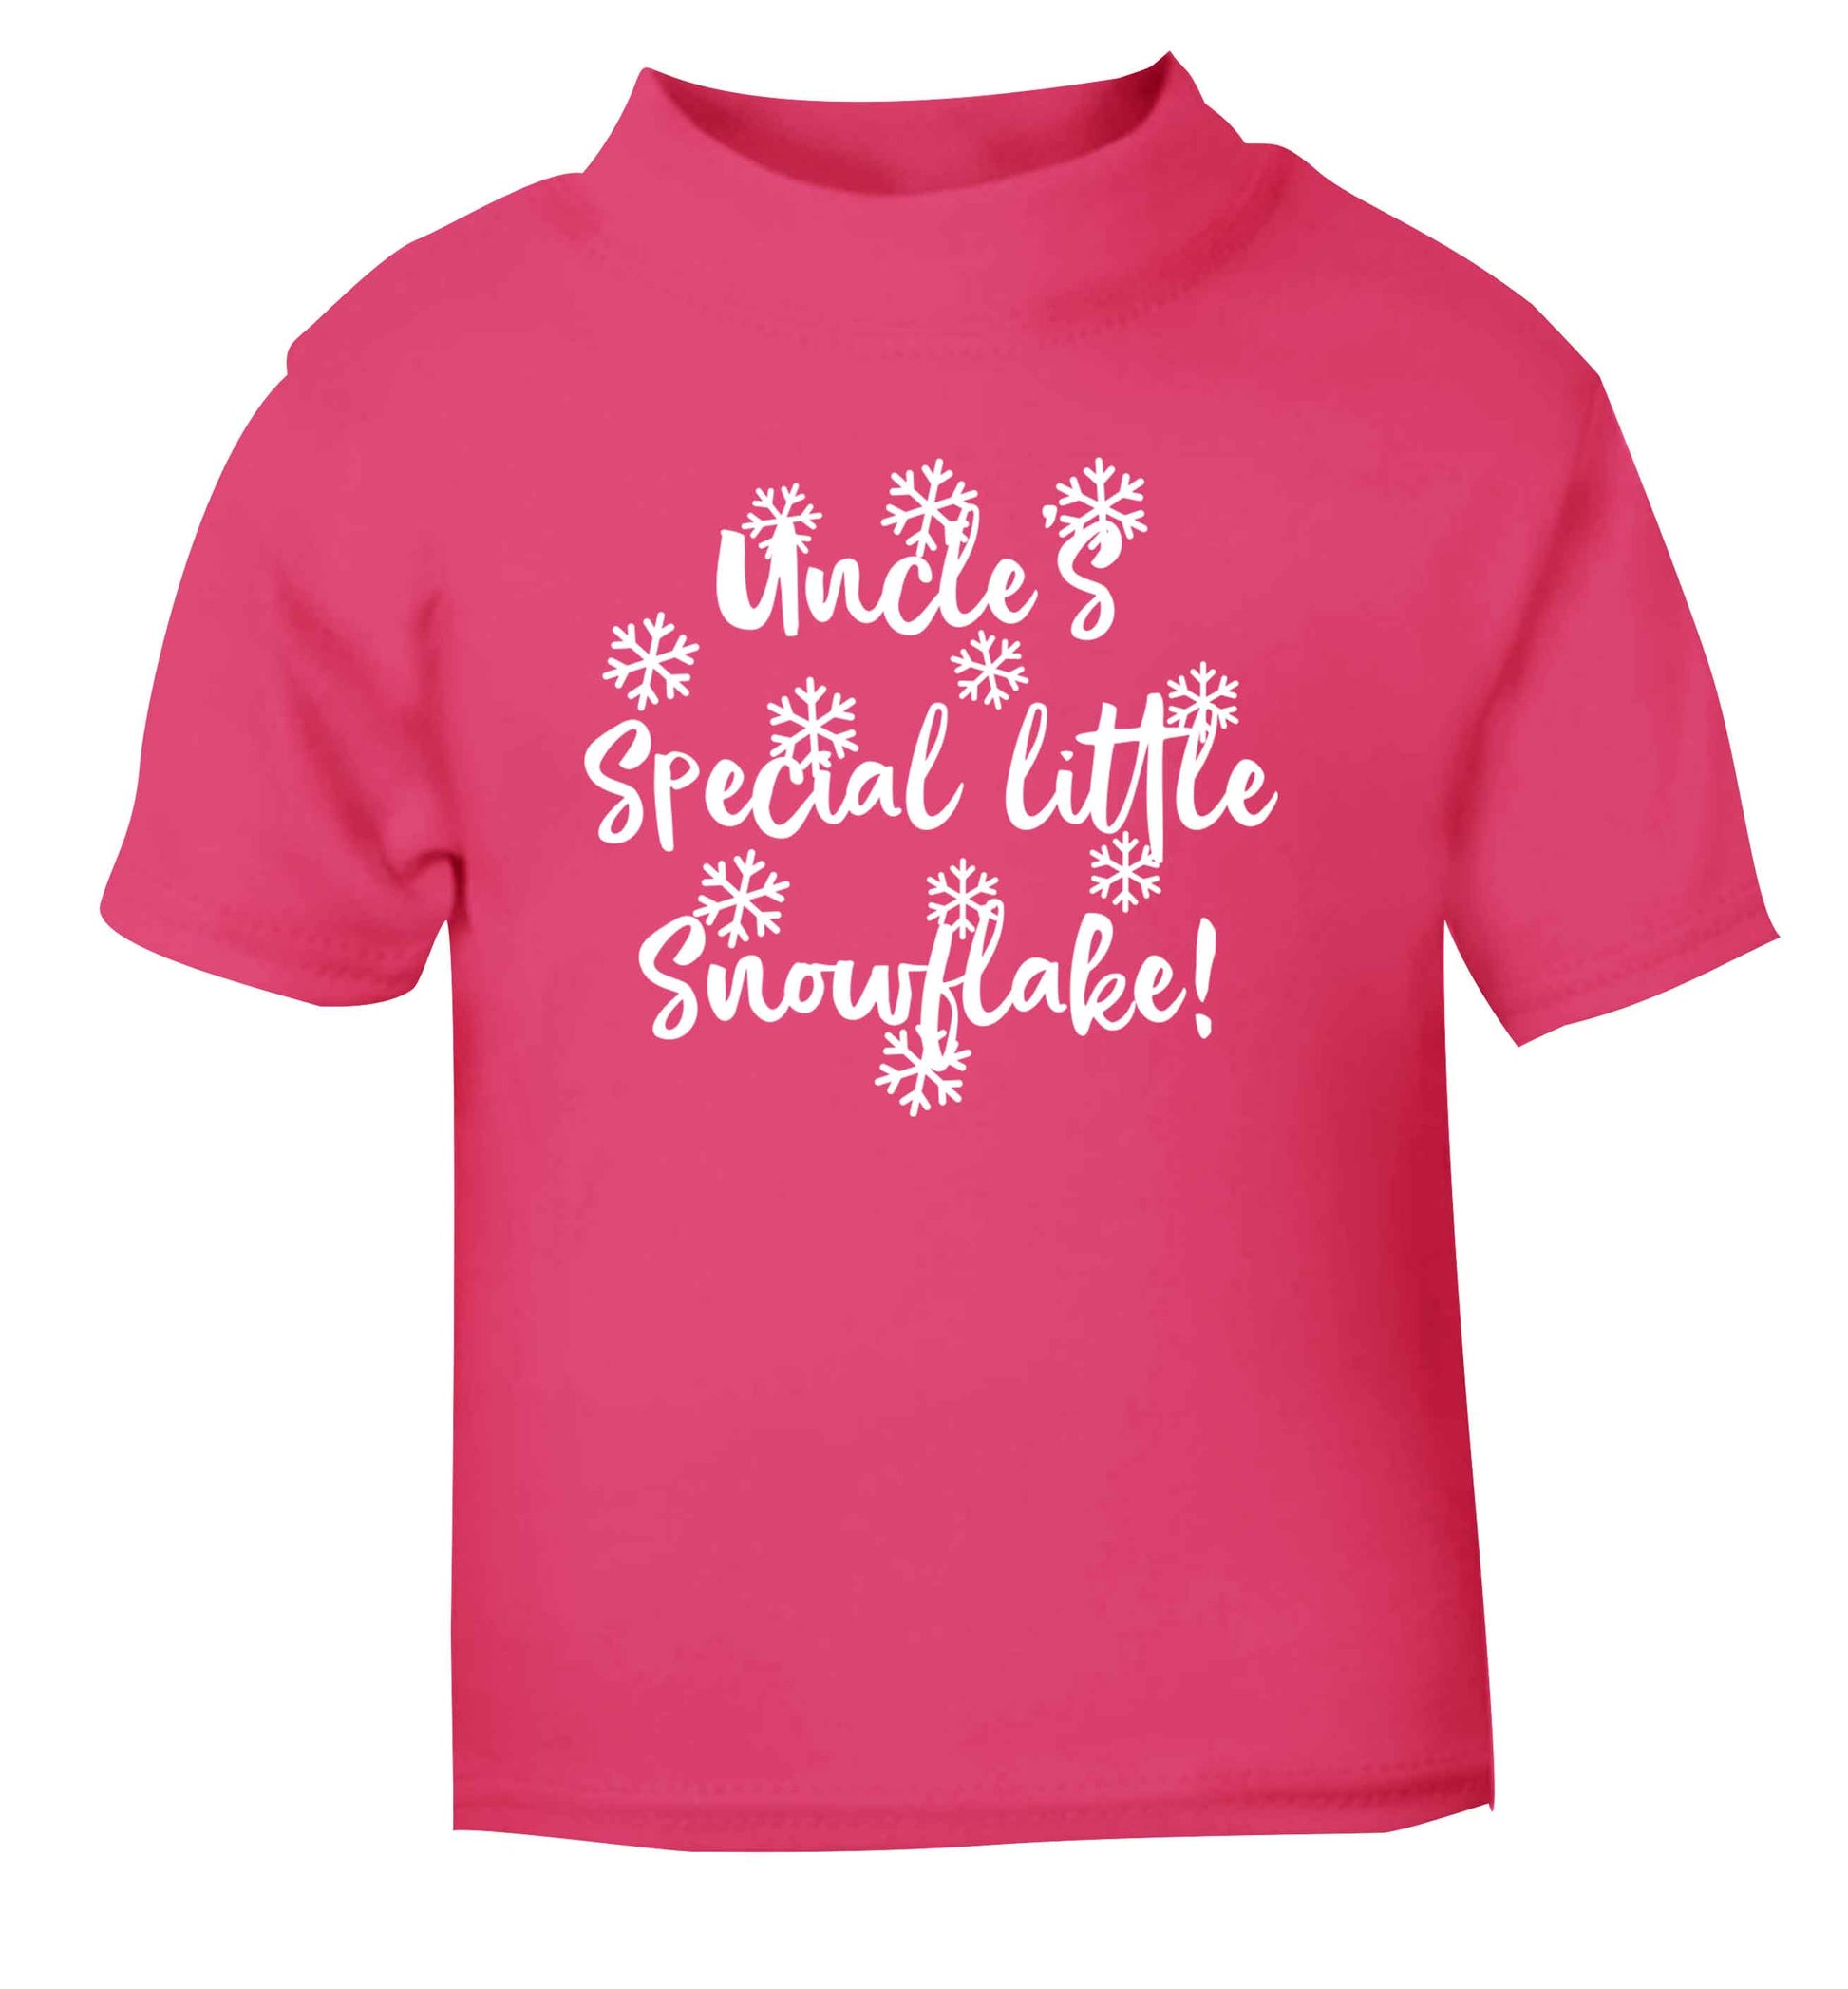 Uncle's special little snowflake pink Baby Toddler Tshirt 2 Years